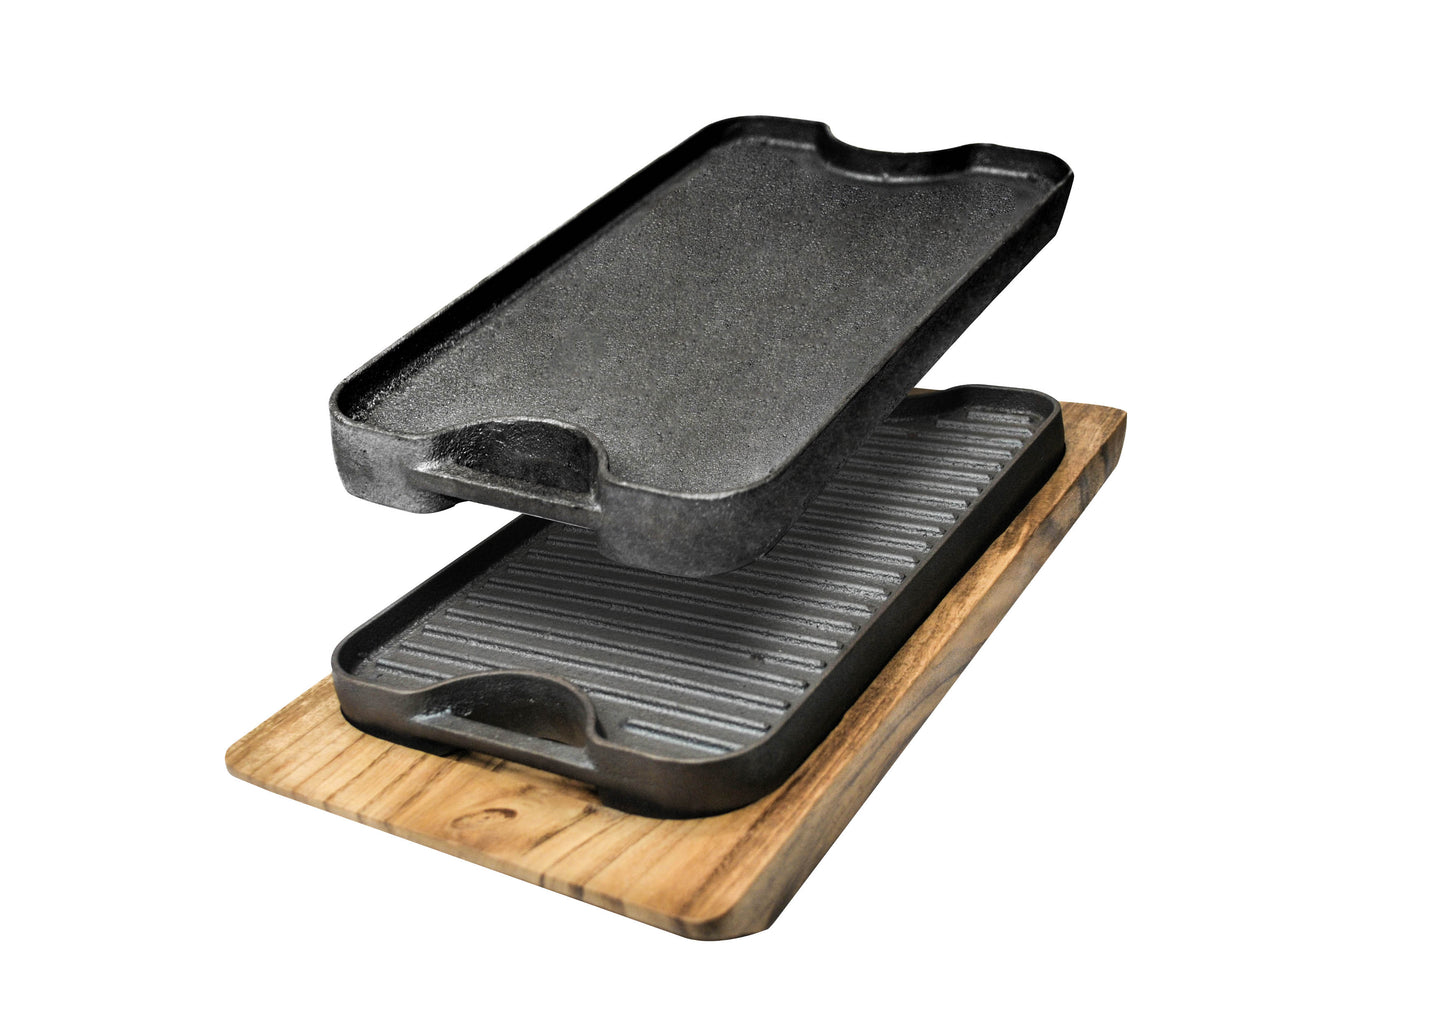 Cast Iron Reversible Grill Griddle 13 in x 7.5 in, RTRGG Pre Seasoned, Krucible Kitchen